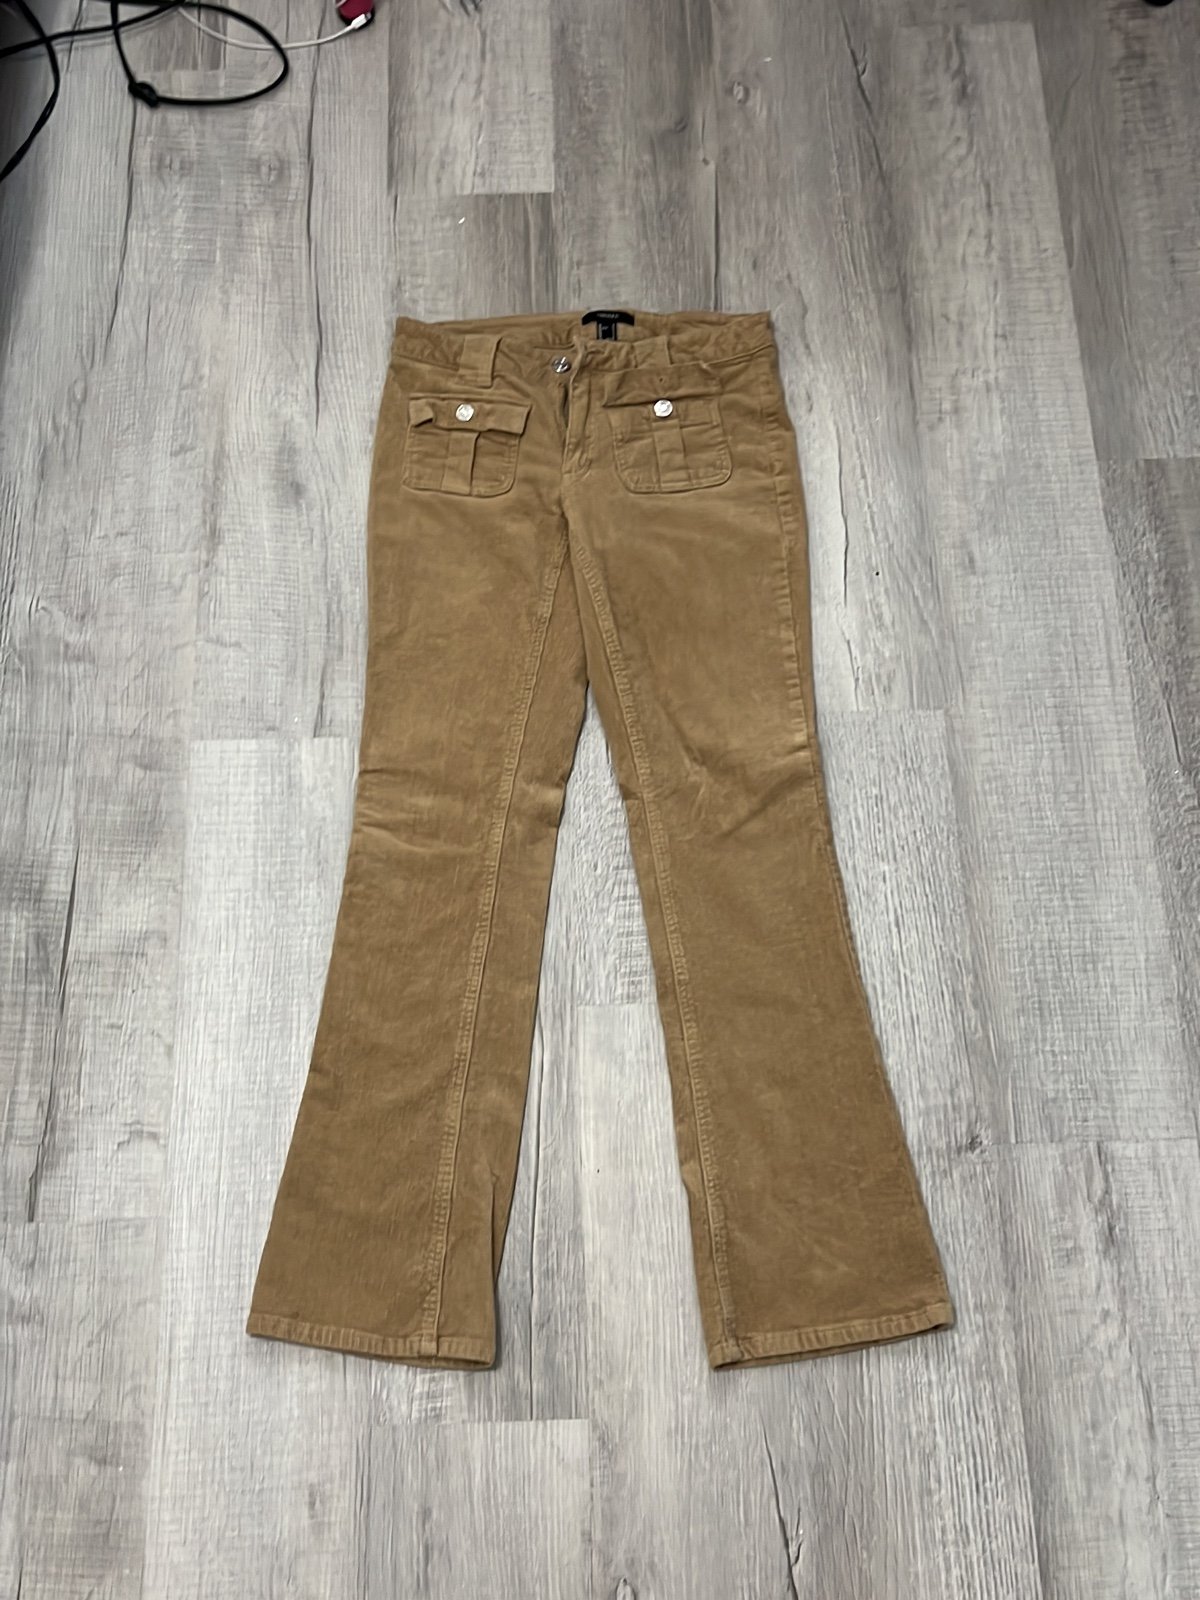 save up to 70% forever 21 bootcut/flare pants G0E5nz2Bp